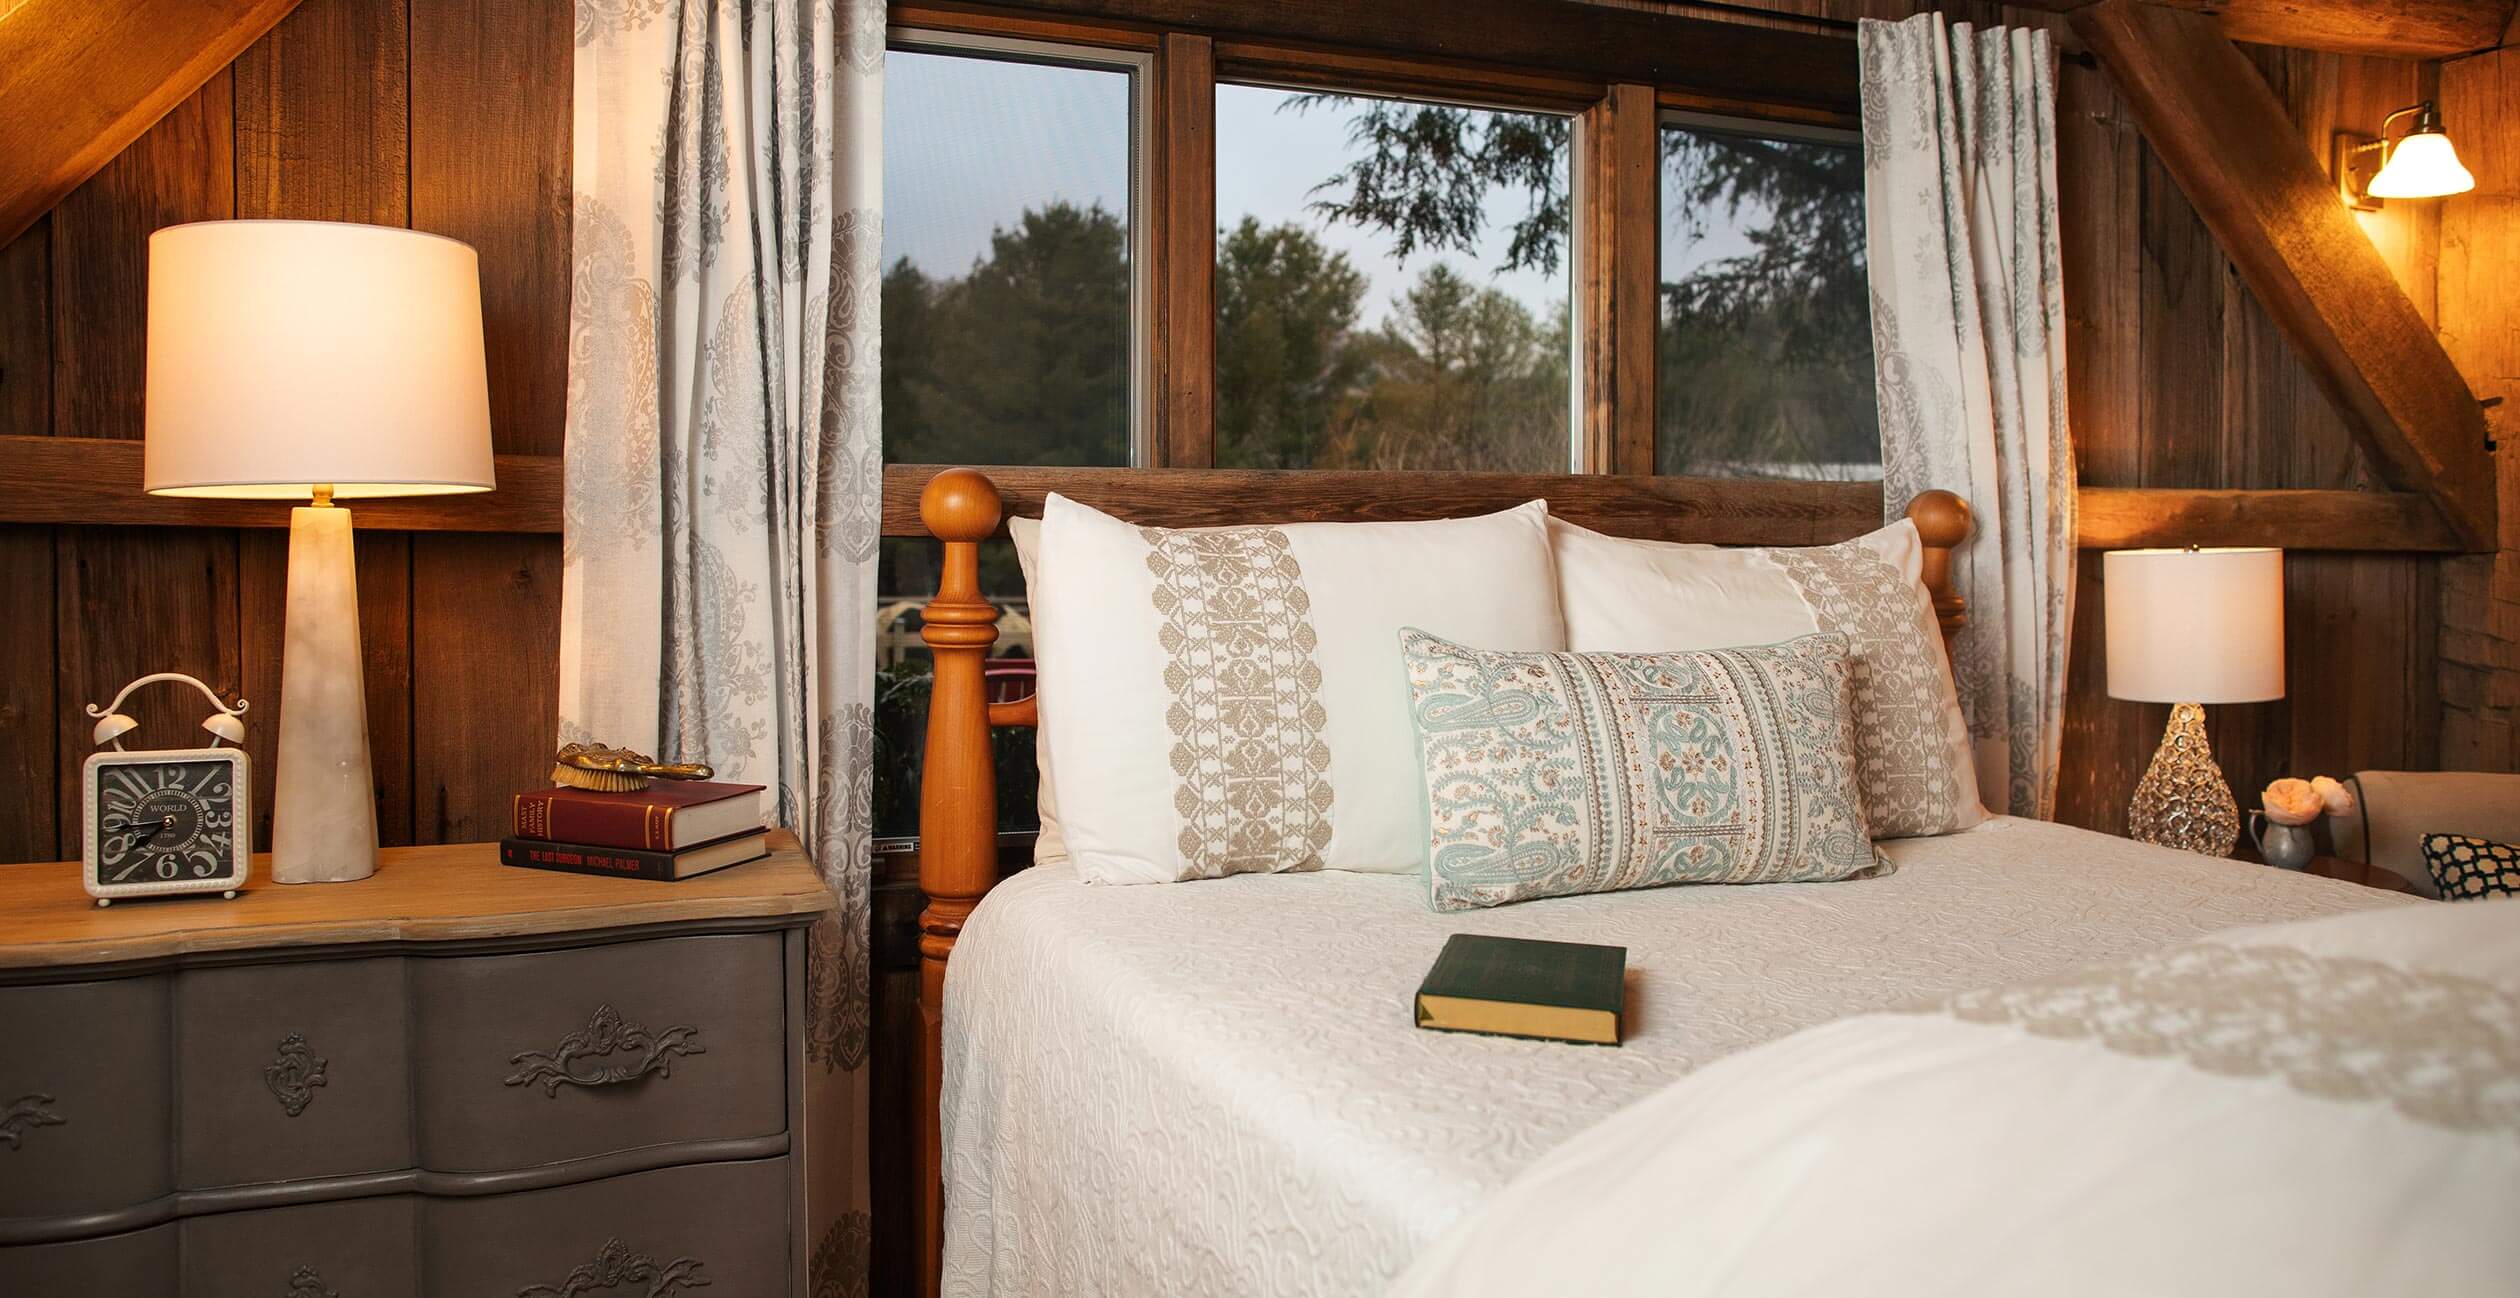 Bed with books on it next to window